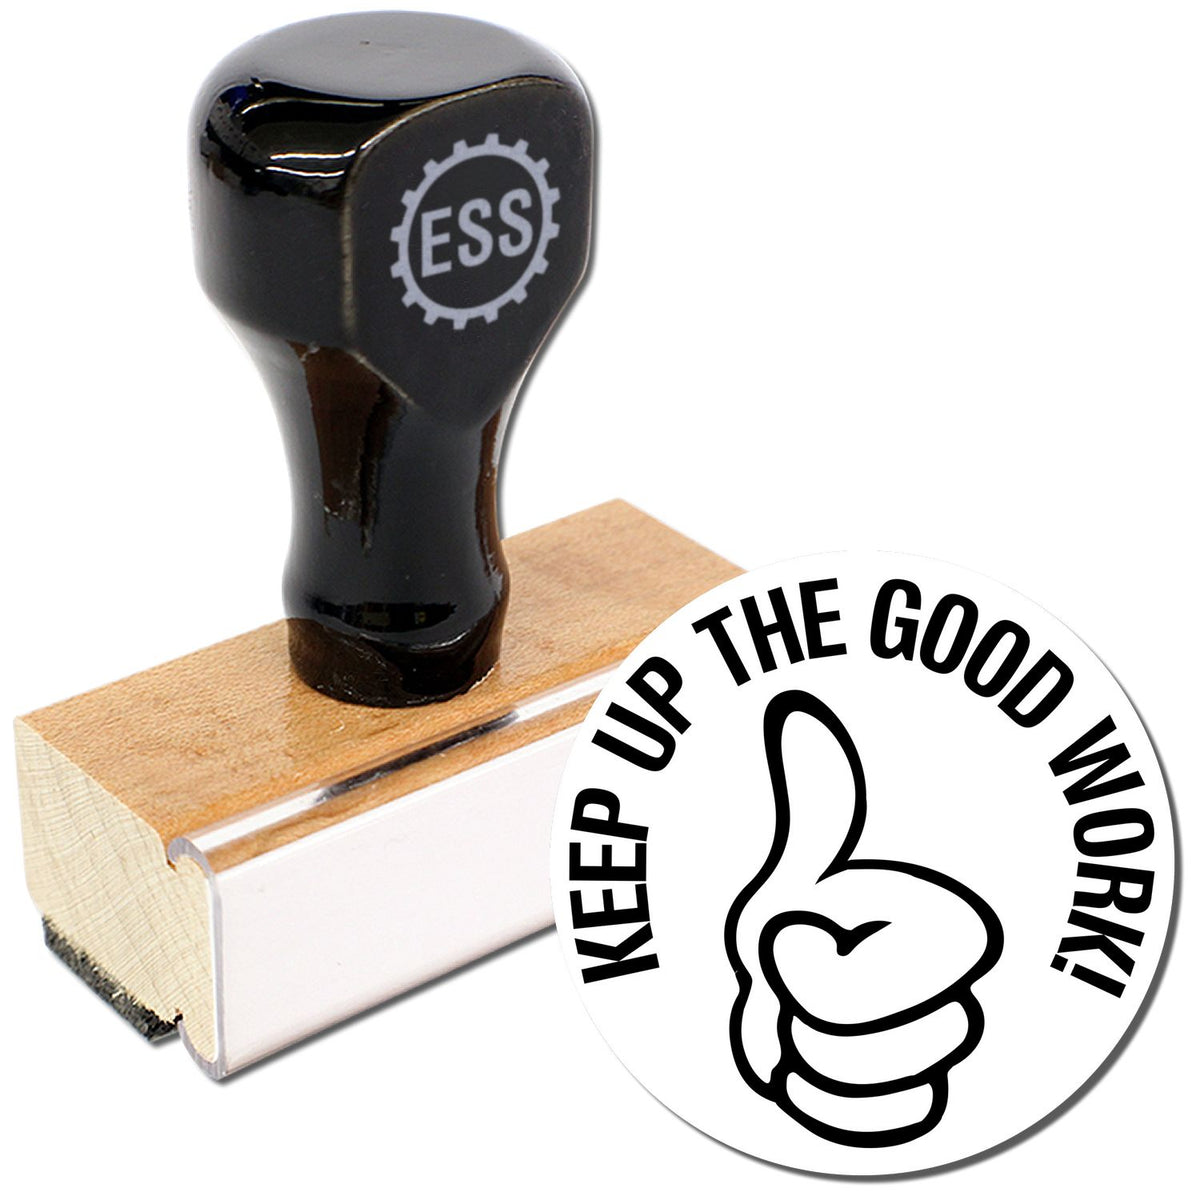 A stock office rubber stamp with a stamped image showing how the text &quot;KEEP UP THE GOOD WORK&quot; in a round shape with a thumbs-up symbol is displayed after stamping from it.